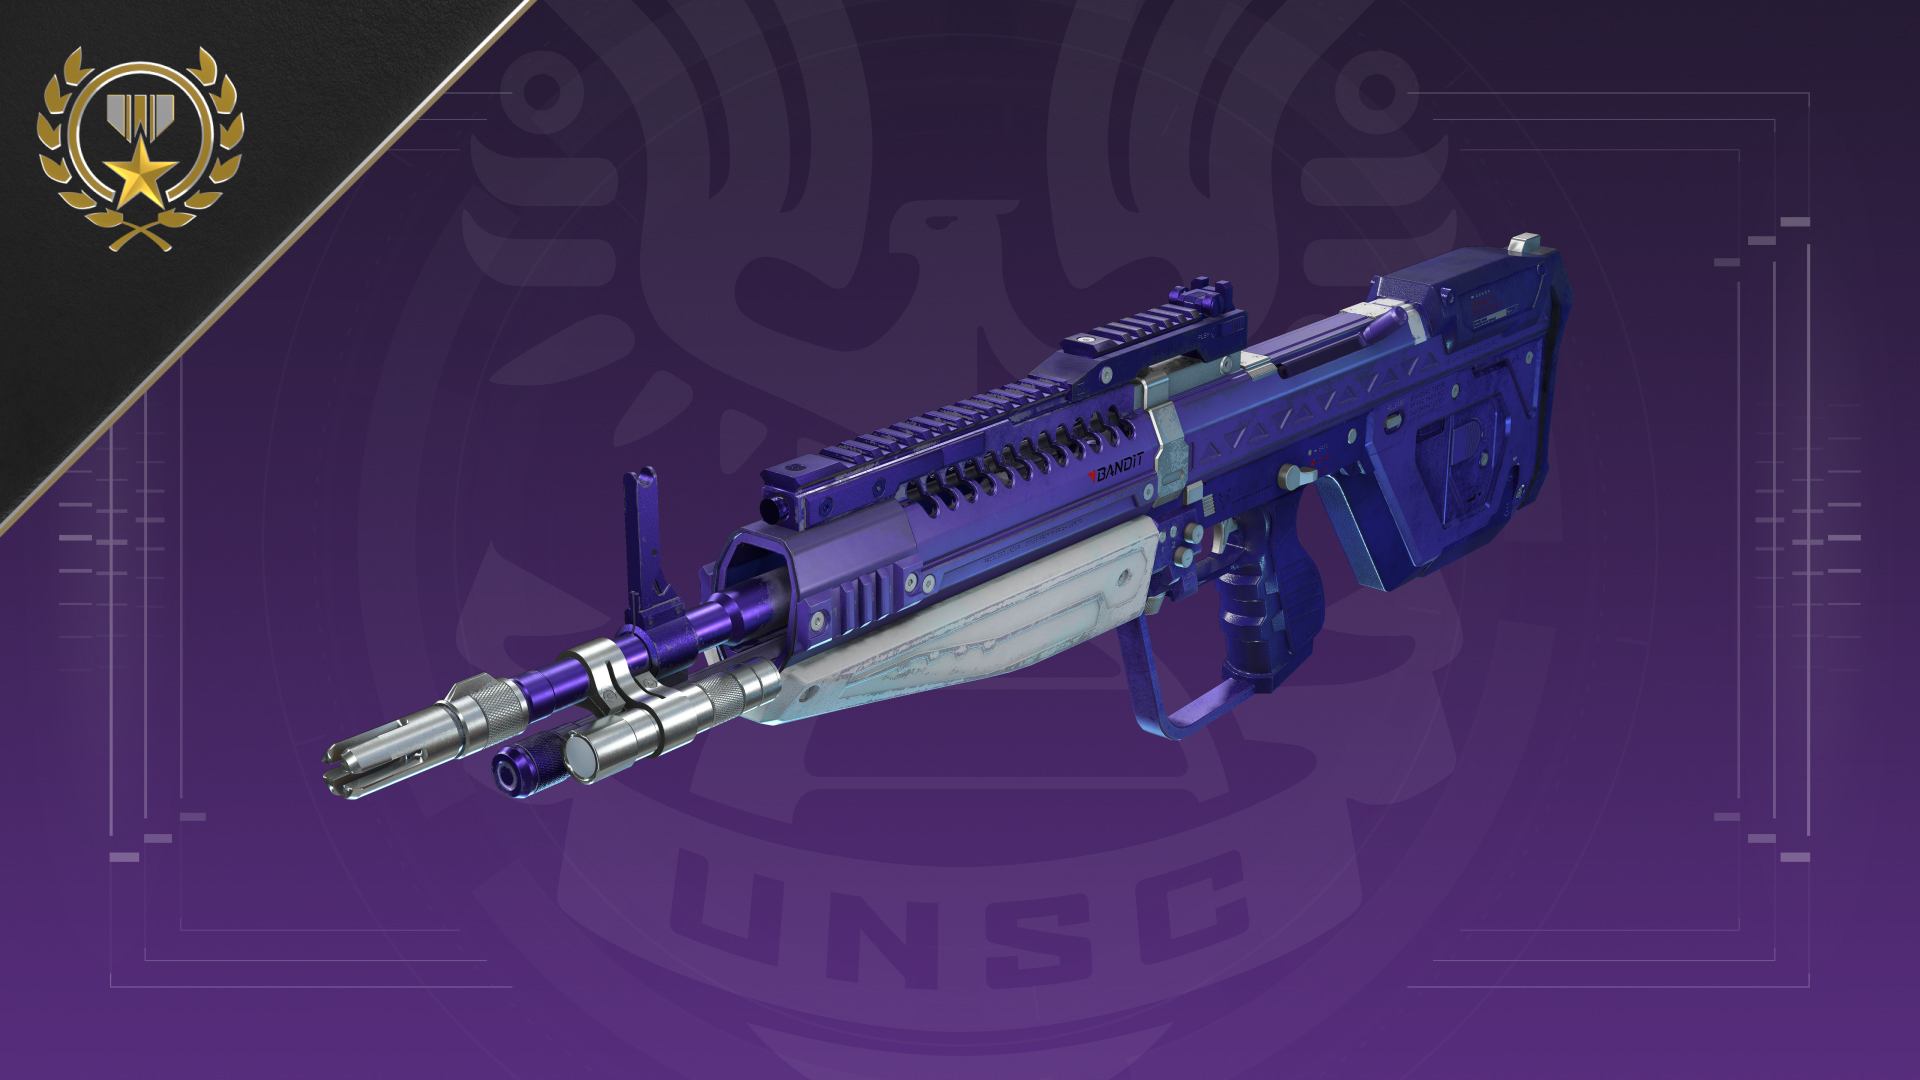 Halo Infinite Weekly Ultimate Reward: Purple Reign weapon coating for the M392 Bandit